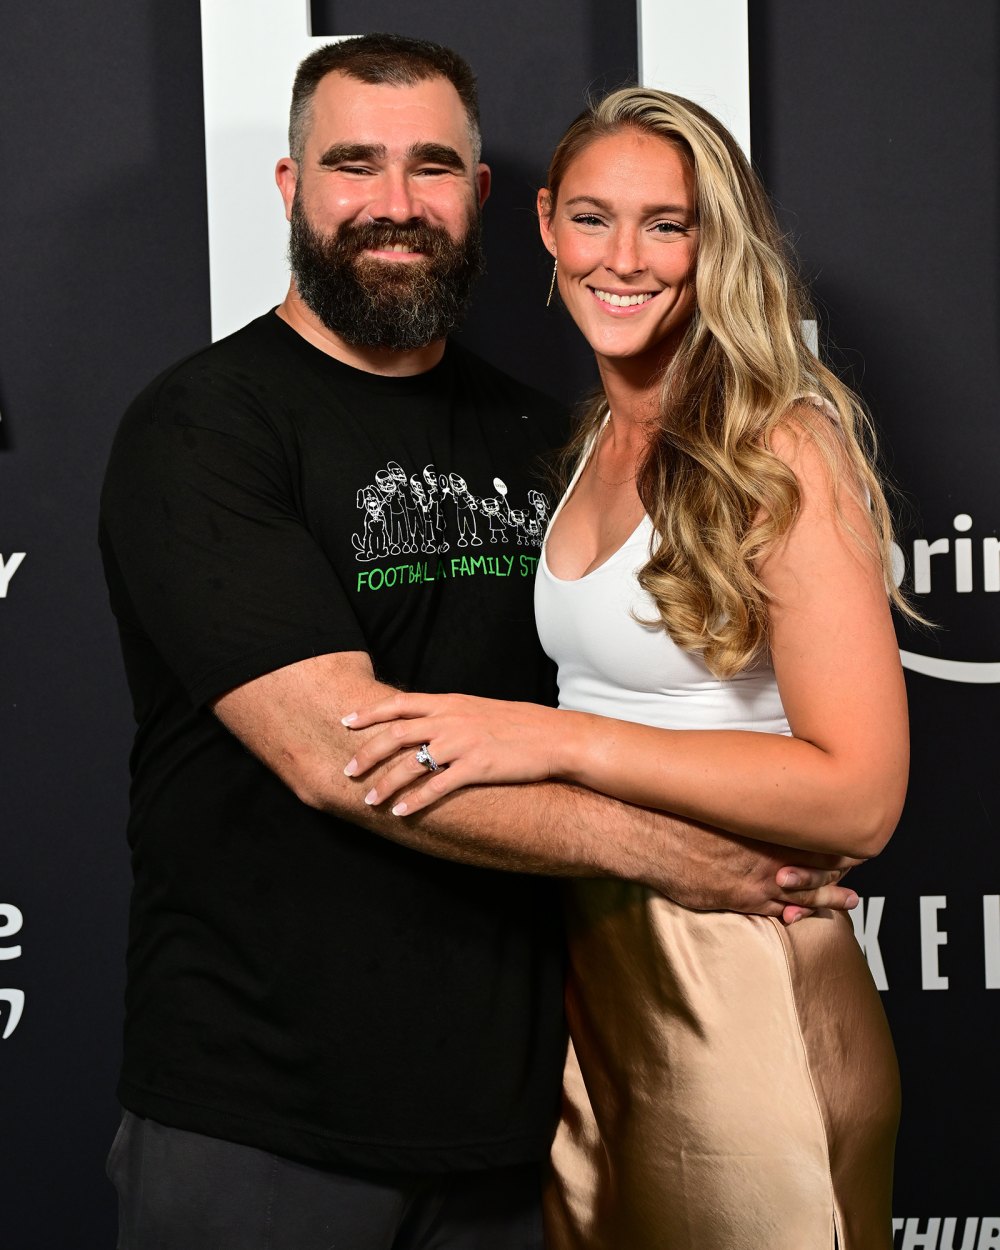 Jason Kelce Is Pretty Sure Wife Kylie Kelce Has Already Seen Her Christmas Present '15 Times'